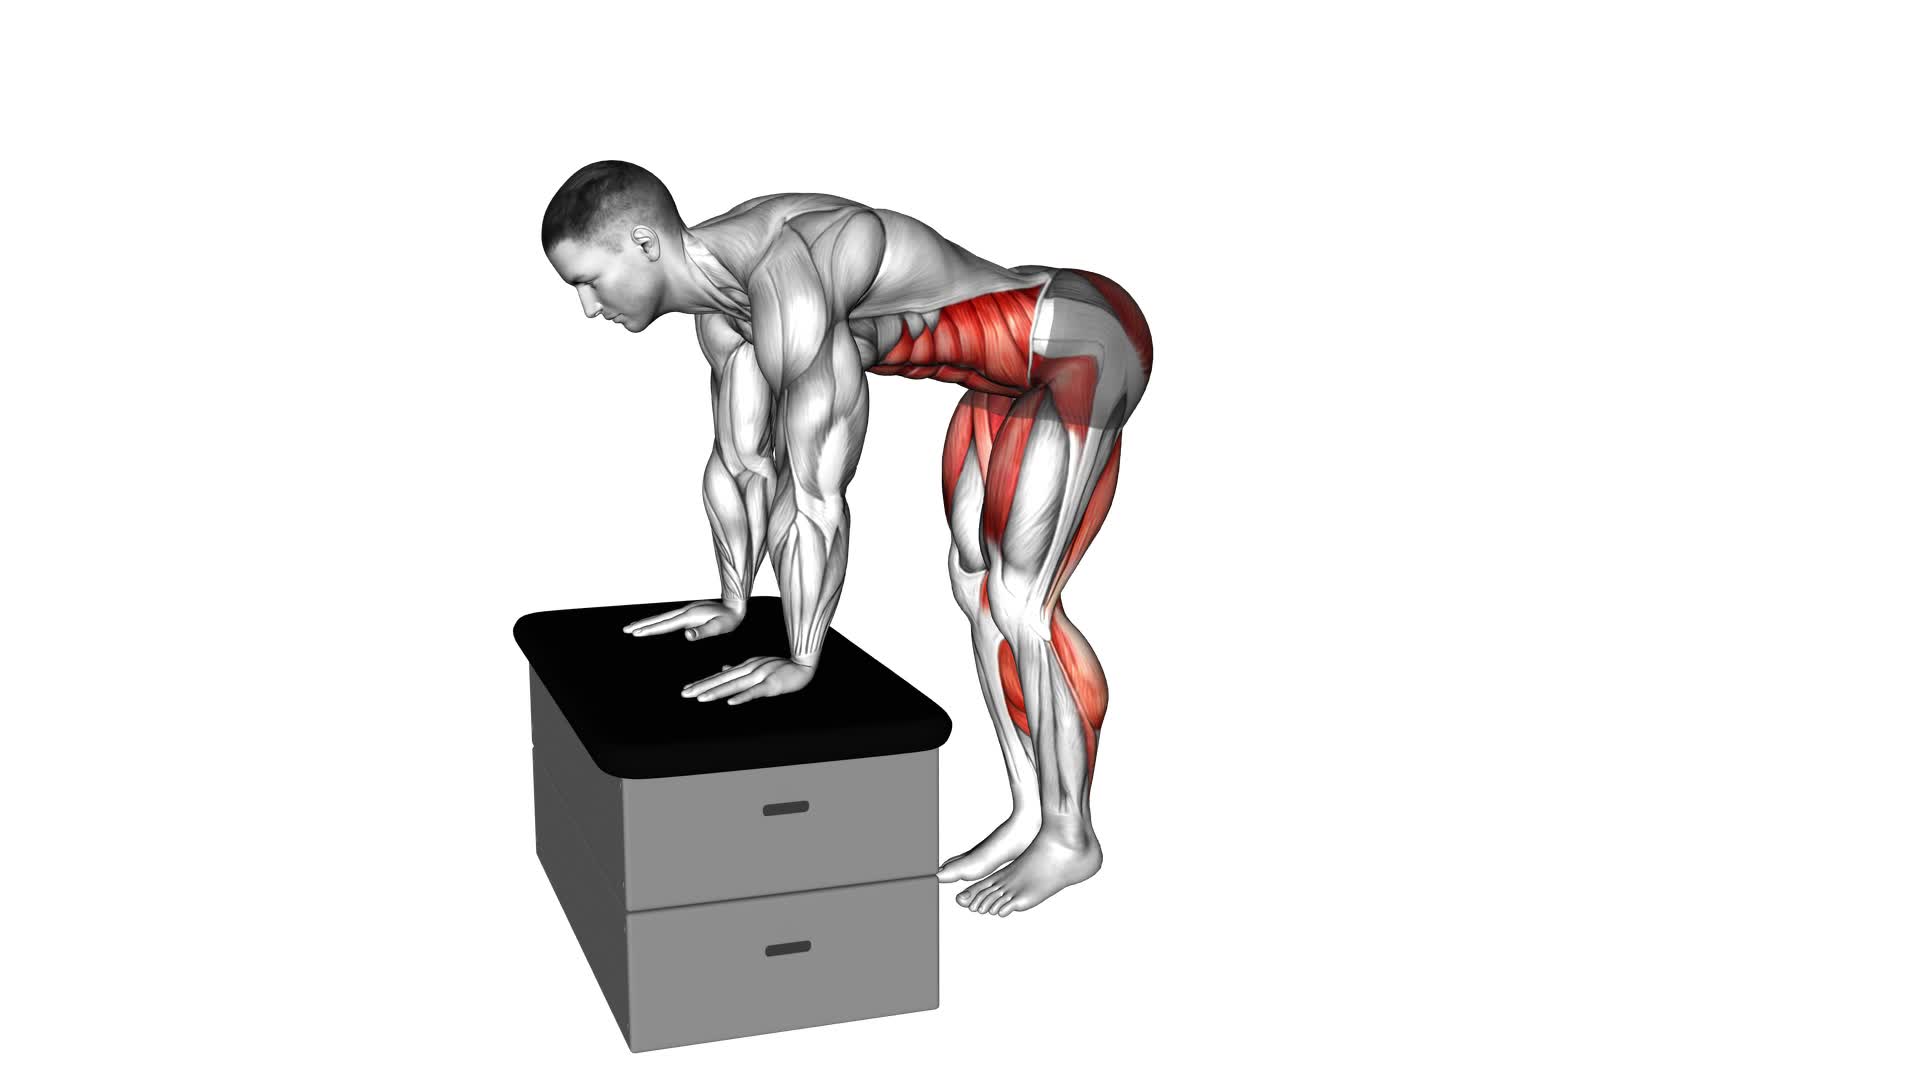 Forward Hop on a Padded Stool (Male) - Video Exercise Guide & Tips